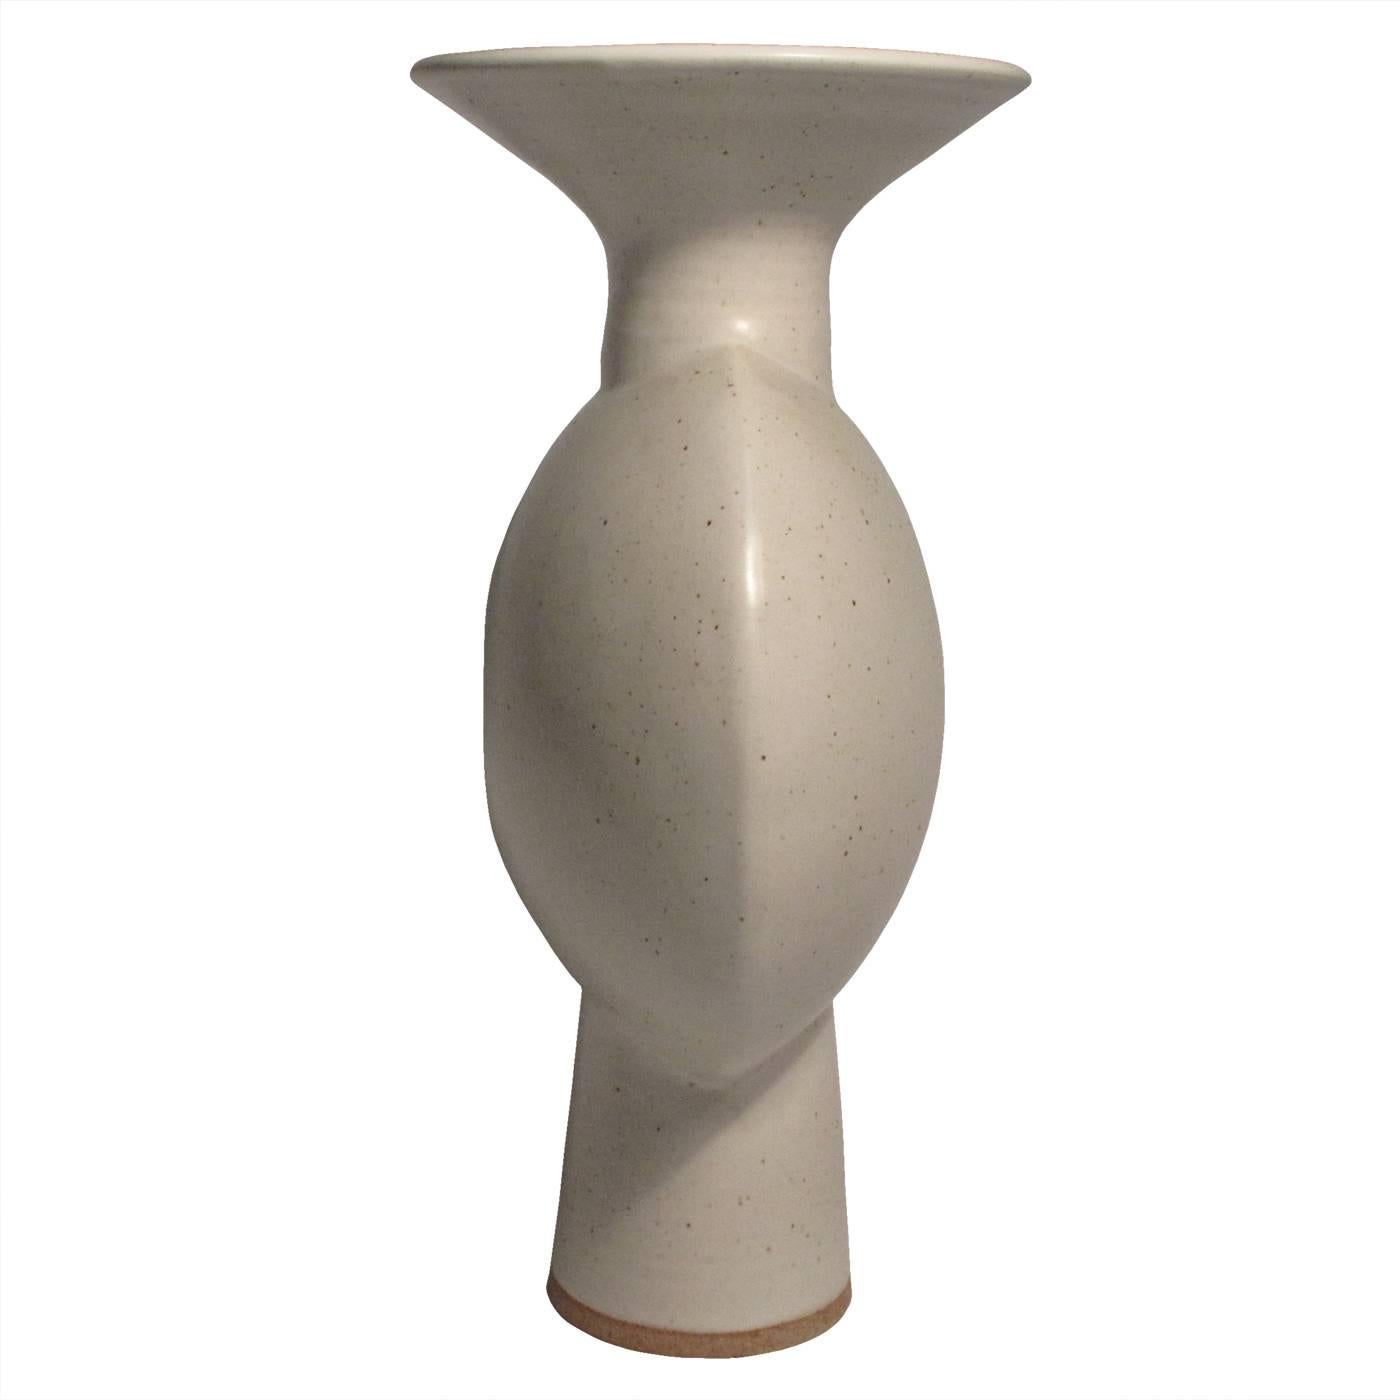 A large off-white speckled glaze ceramic sculptural vase. For decorative purposes only. Signed by the artist.